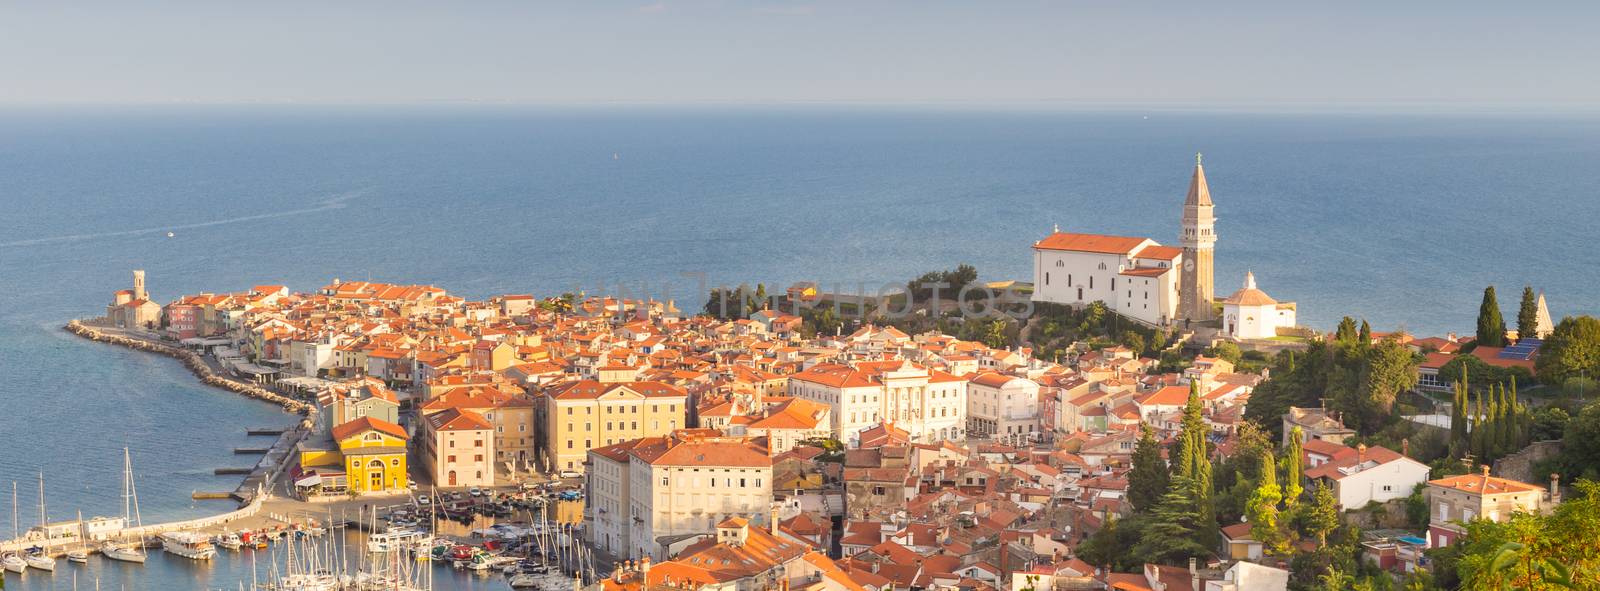 St. George's Parish Church in picturesque old town Piran, Slovenia. Senic panoramic view.